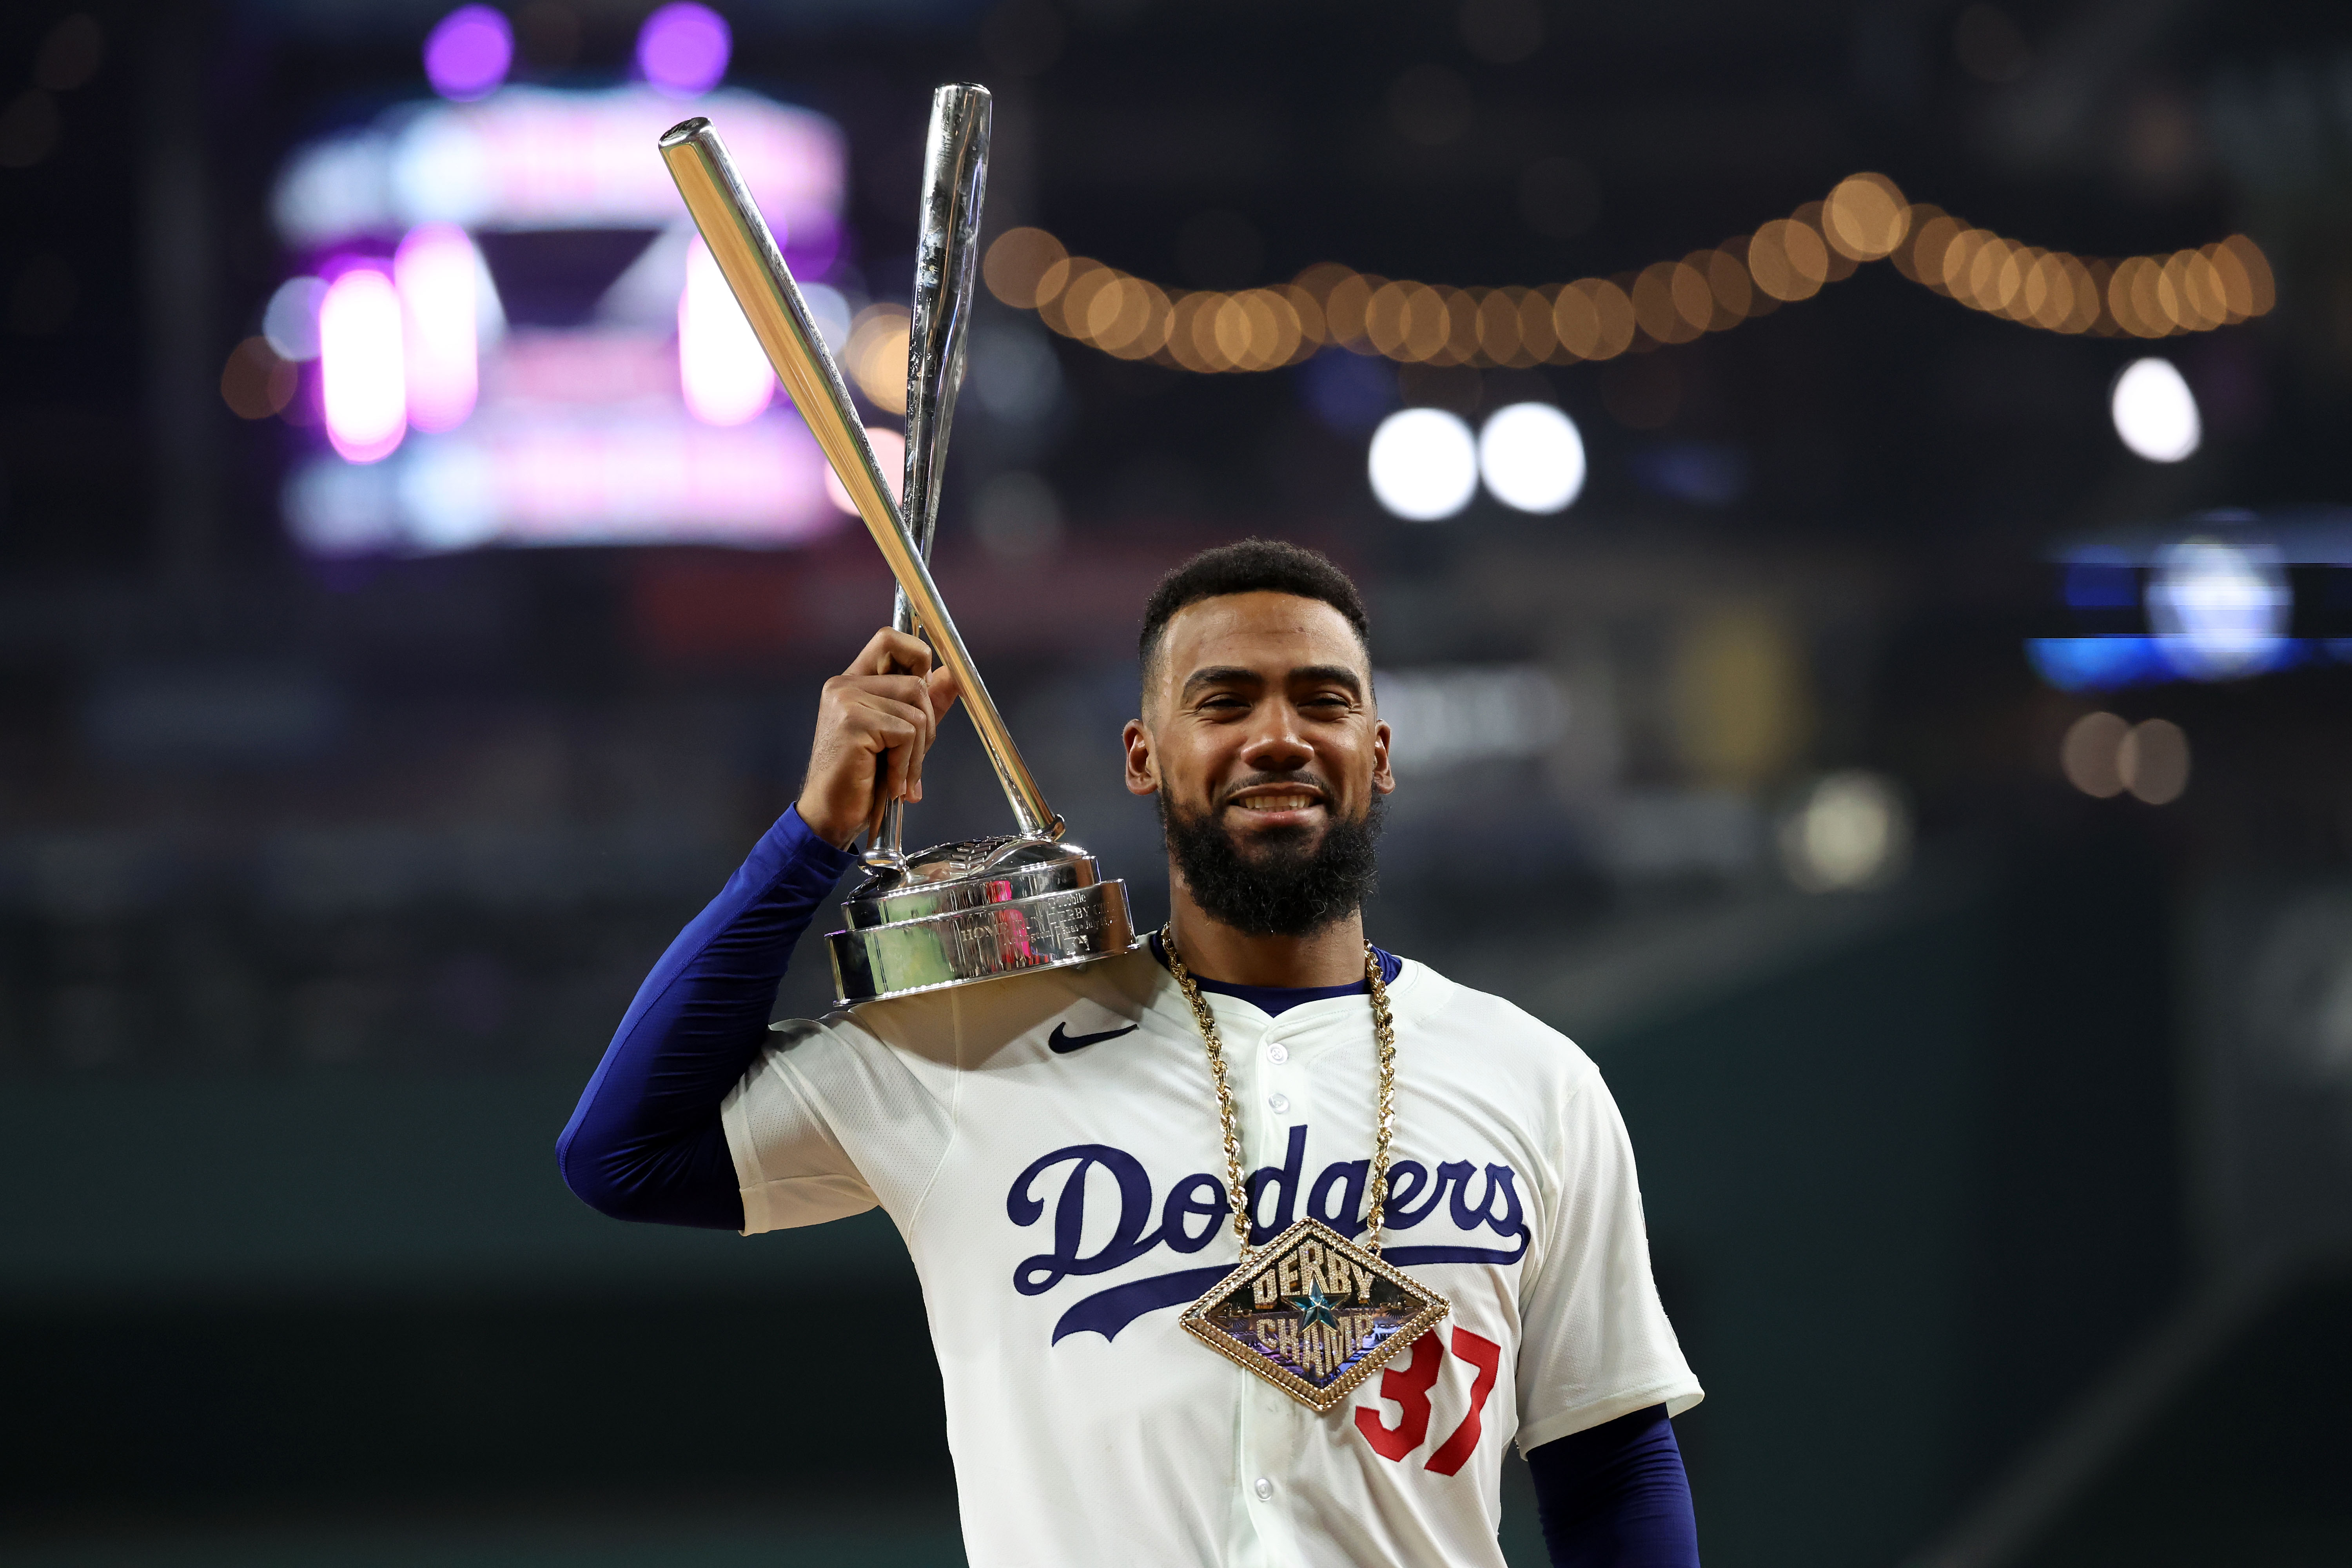 Red Sox vs. Dodgers Prediction, Picks & Player Props Today: Will Hernandez Rack up RBIs?